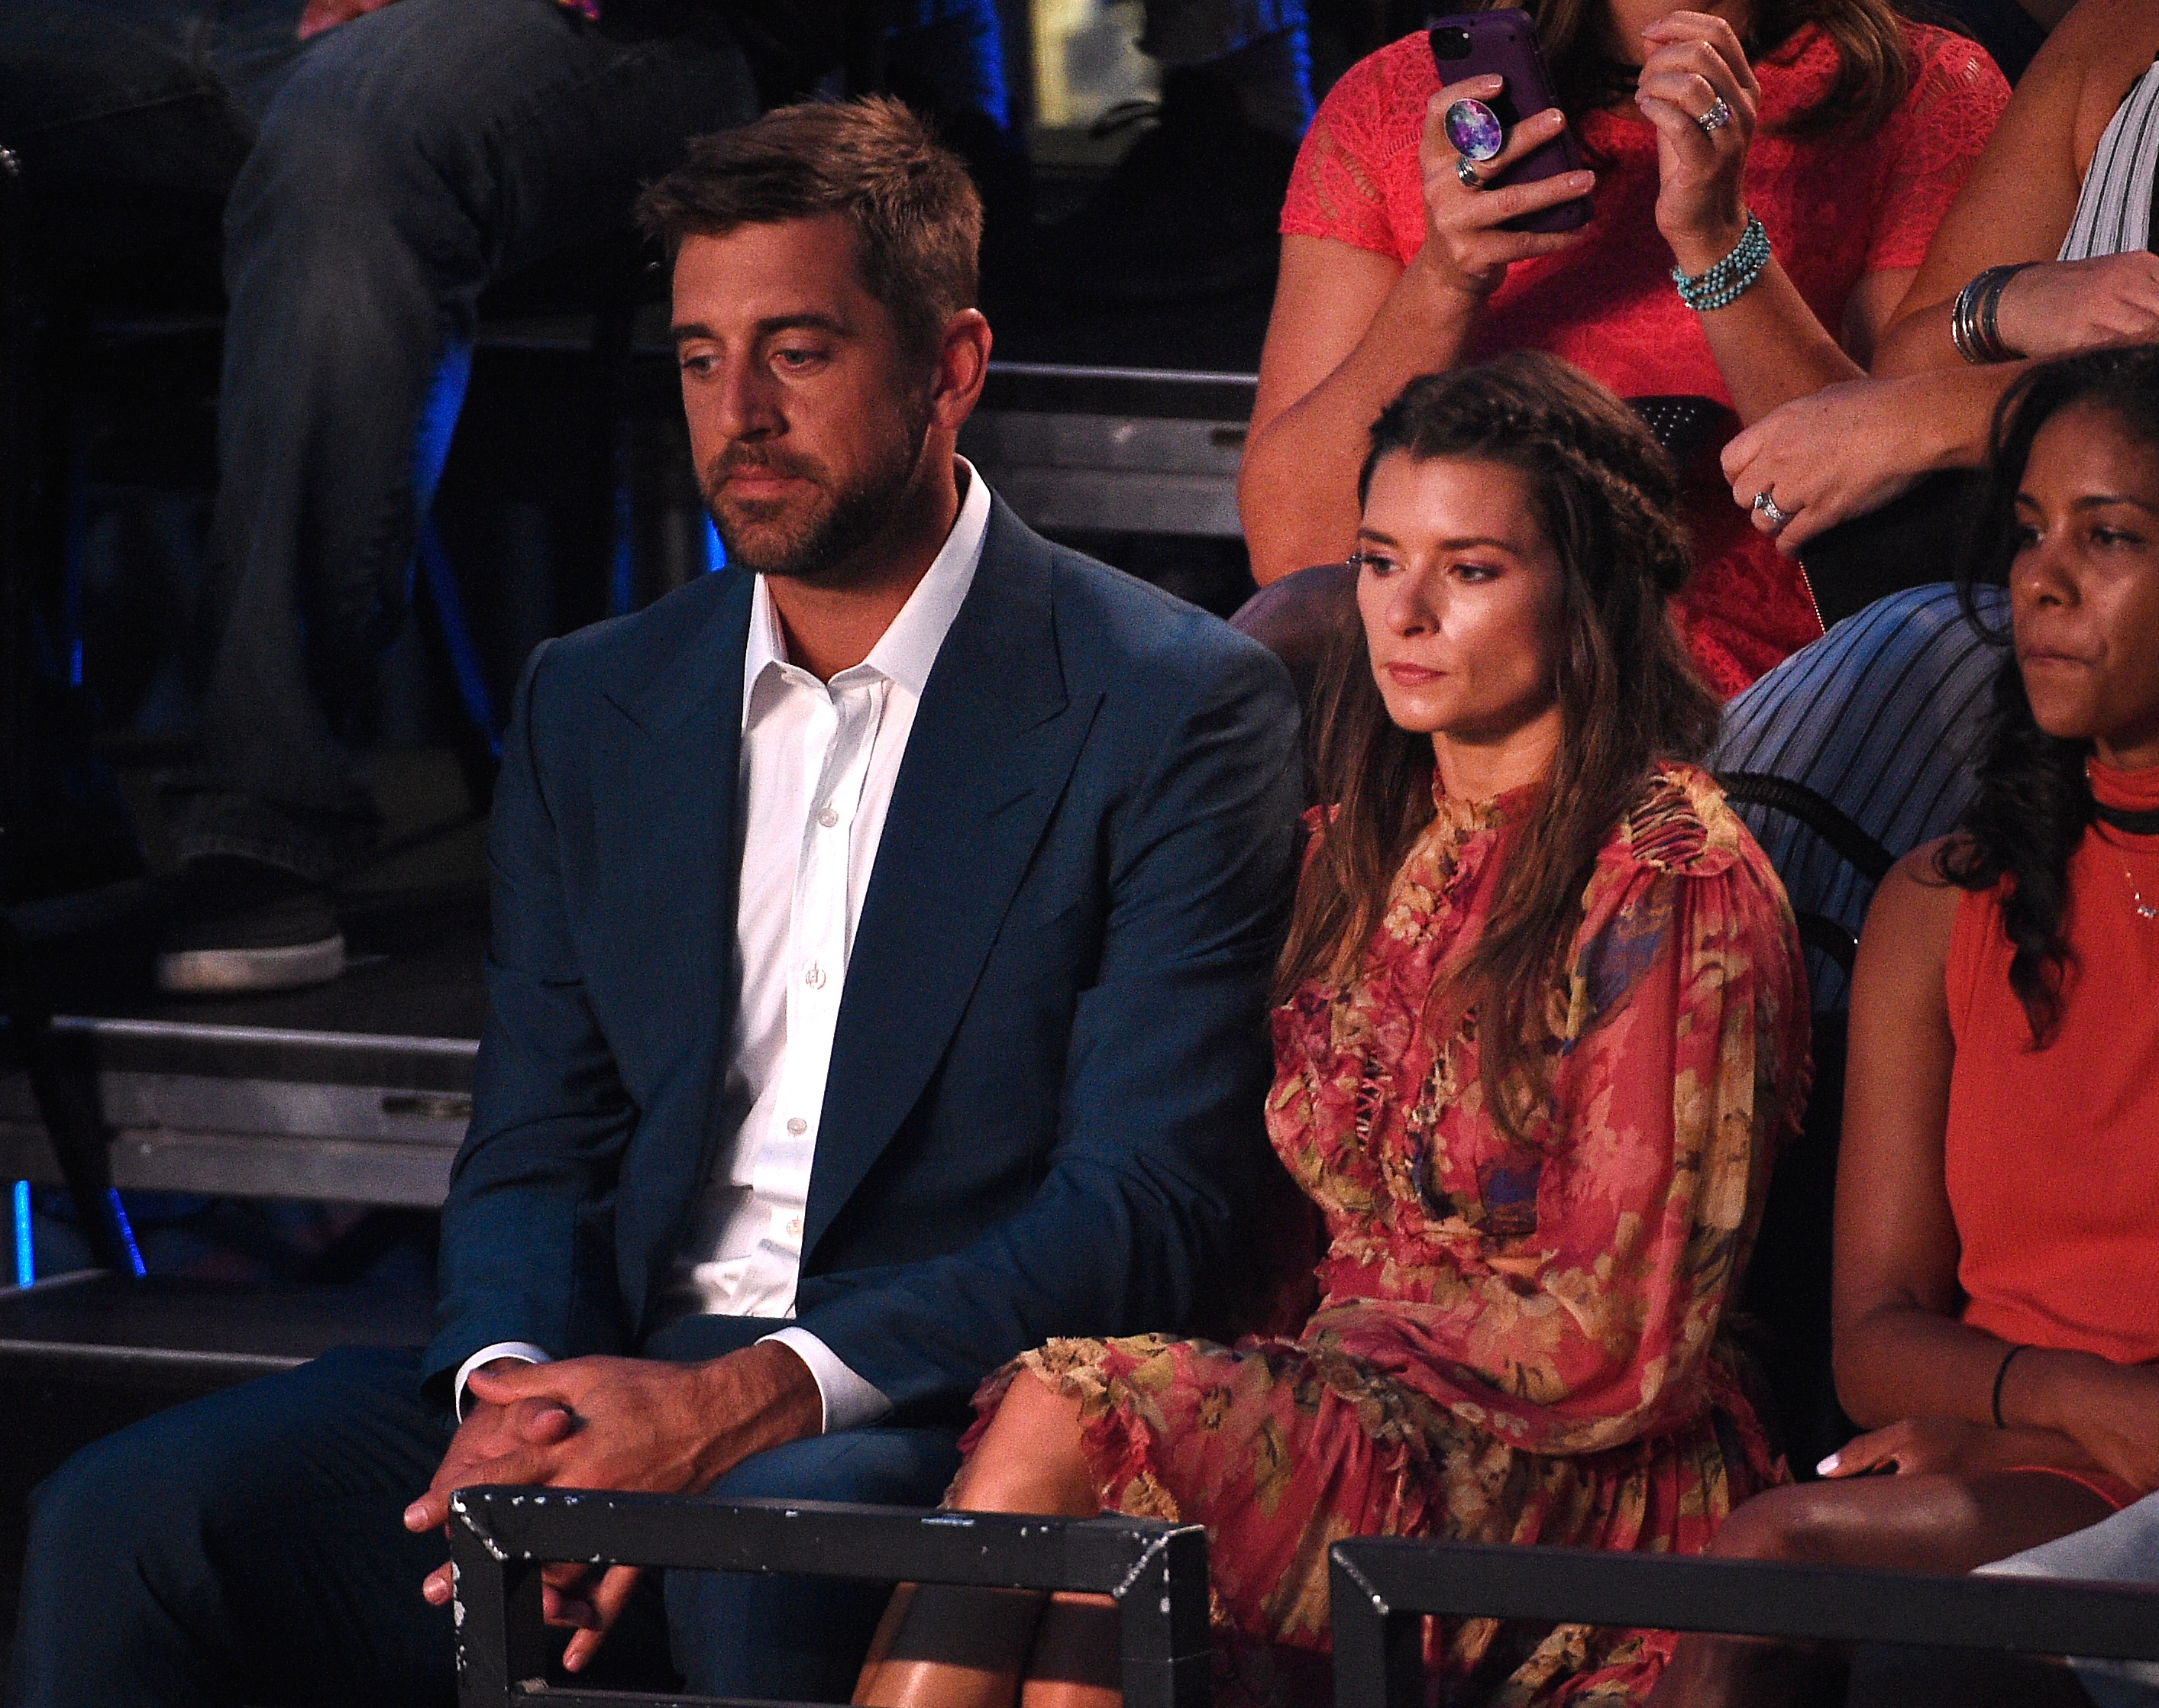 Aaron Rodgers and Danica Patrick attend the Nickelodeon Kids' Choice Sports Awards in 2018